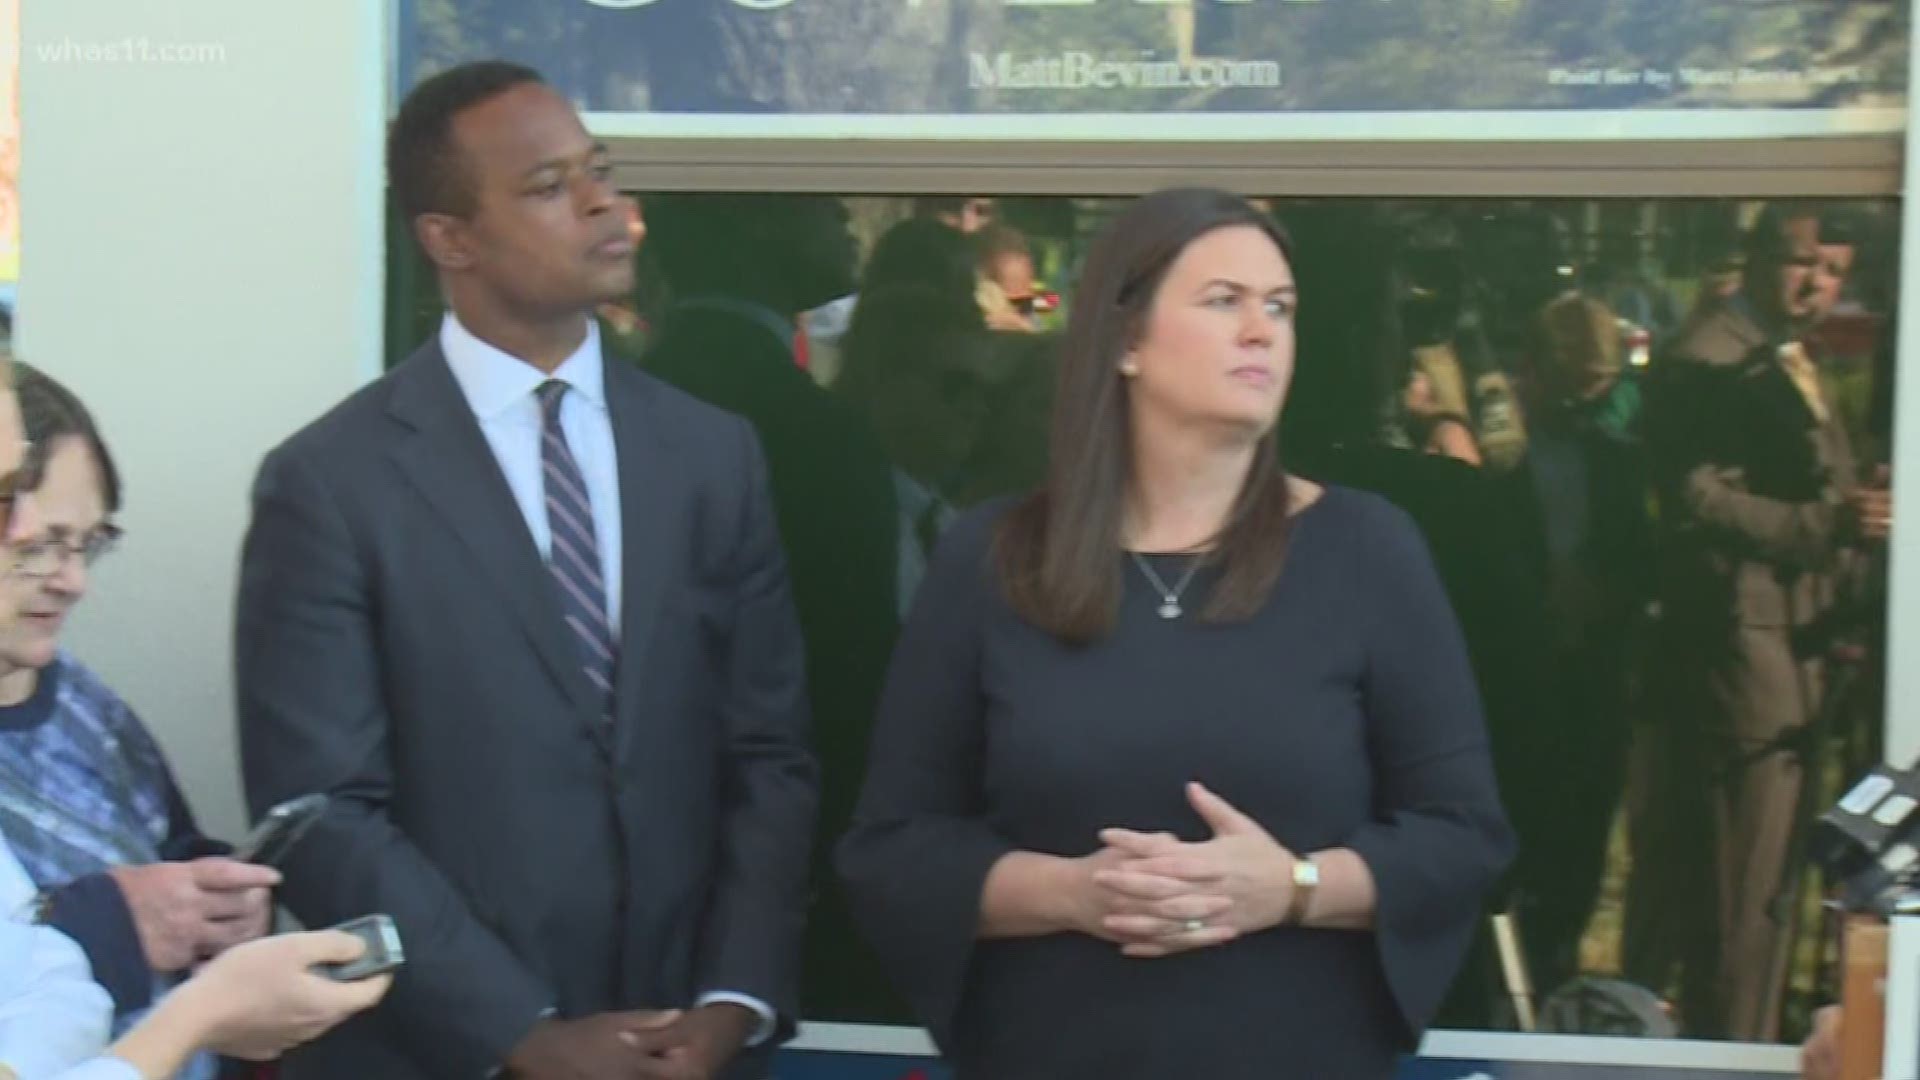 Sarah Huckabee Sanders in Louisville in support of Gov. Bevin as election draws near.